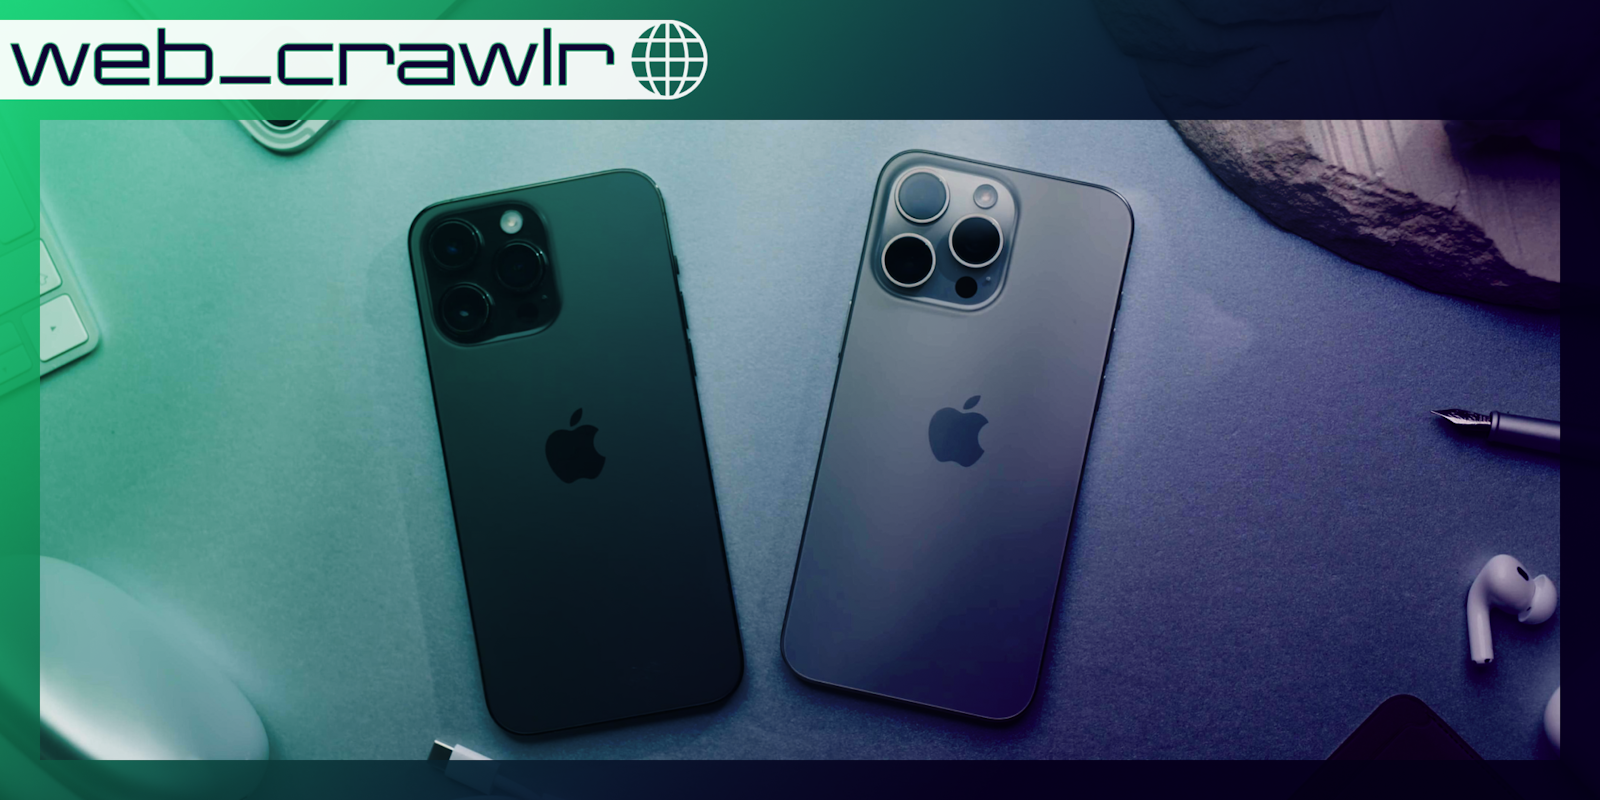 Two iPhones. The Daily Dot newsletter web_crawlr logo is in the top left corner.